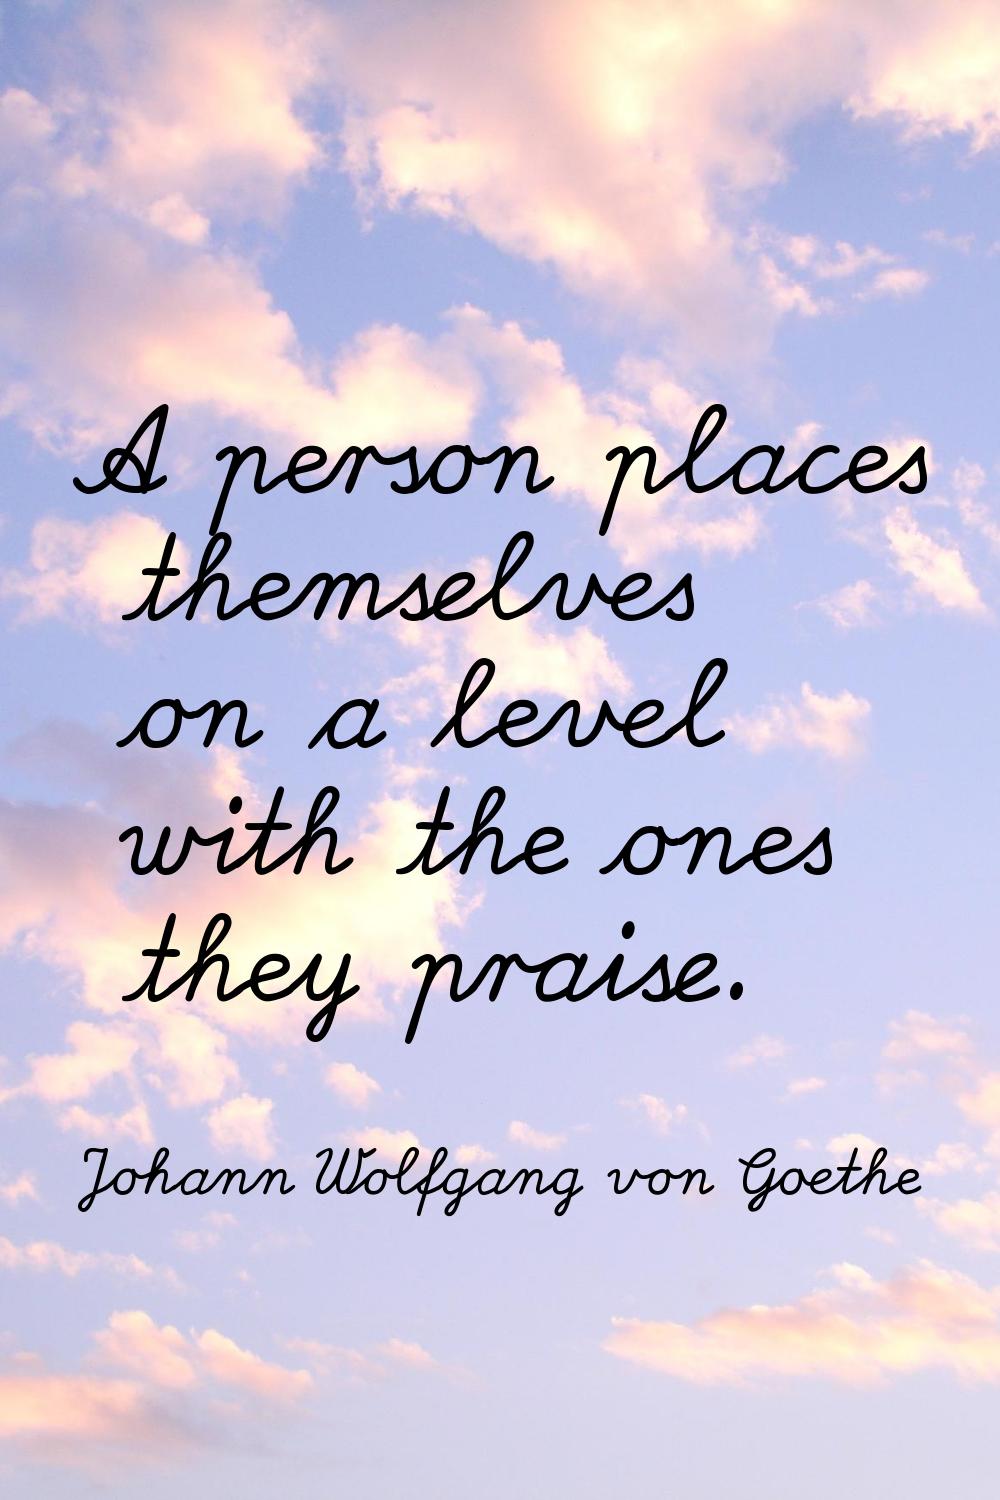 A person places themselves on a level with the ones they praise.